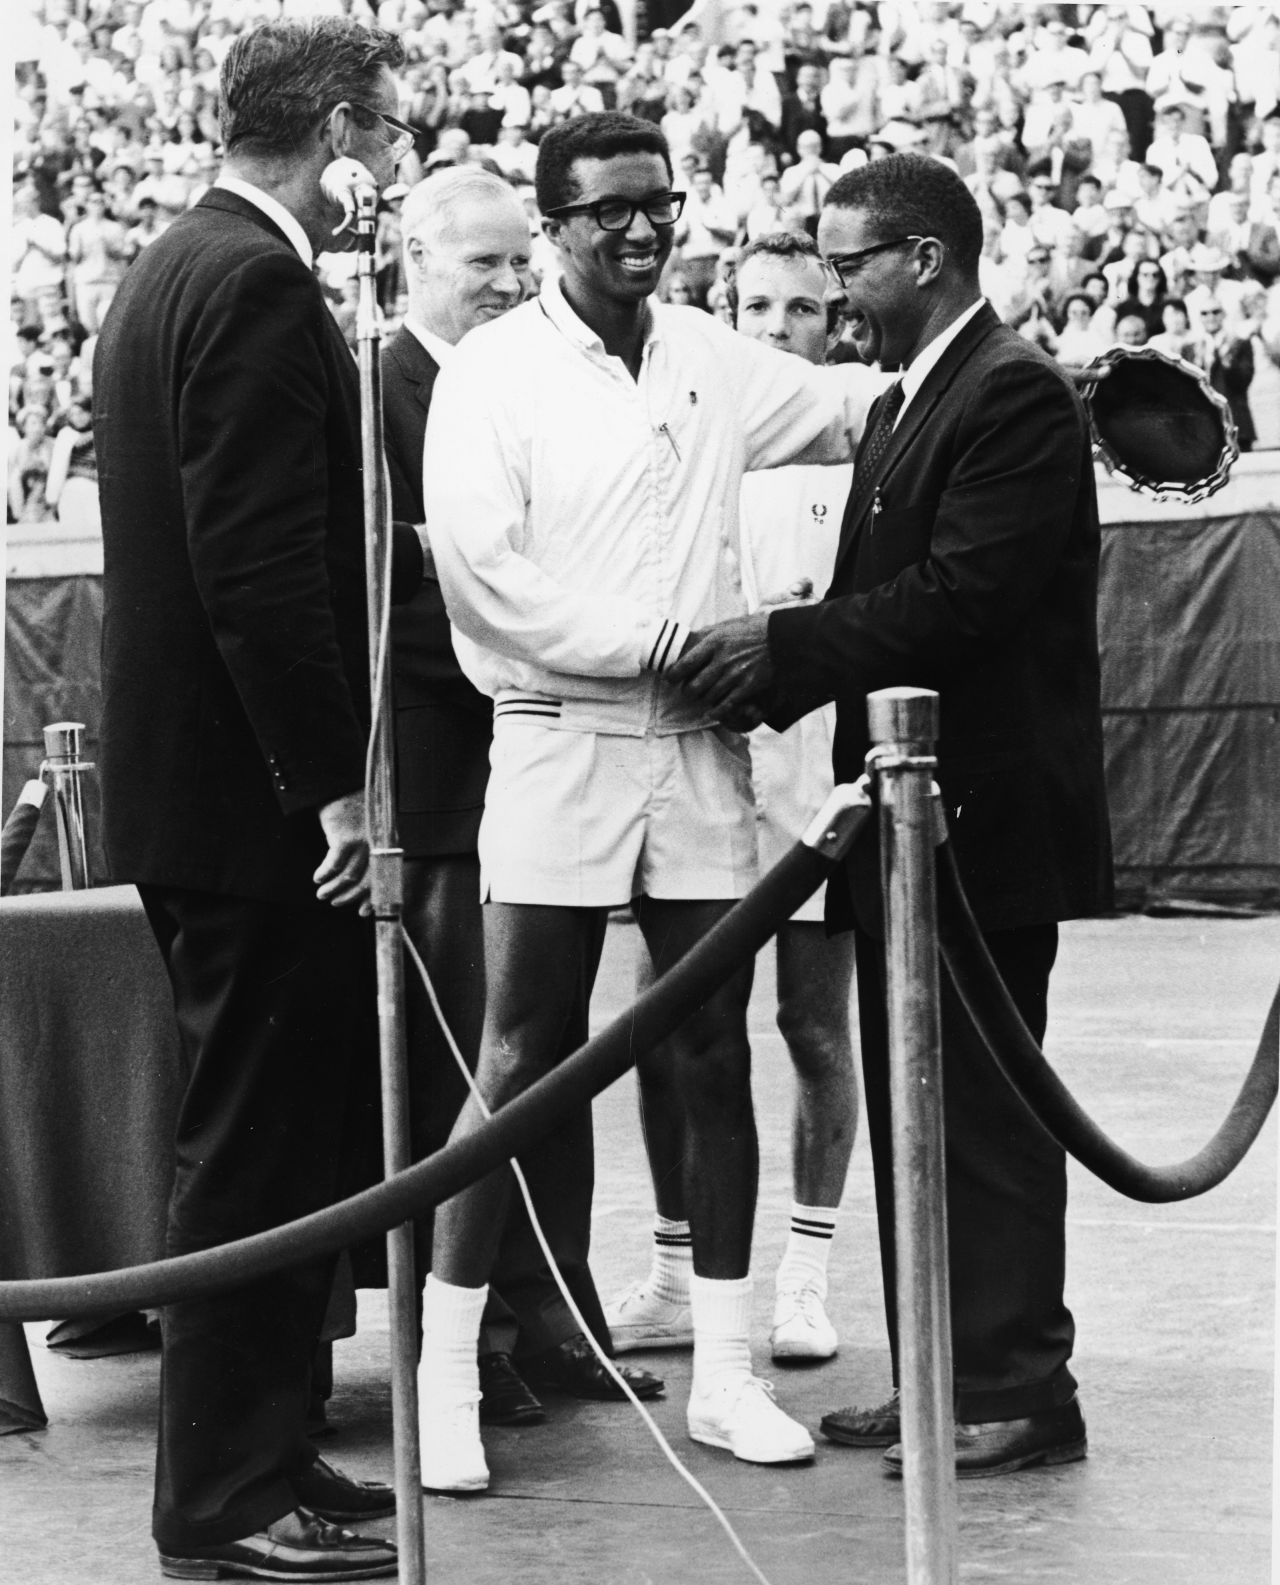 Five years before his win at Wimbledon, Ashe won the U.S. Open  title at Forest Hills in New York. Here he receives the congratulations of his father Arthur Ashe Senior after winning the U.S. grand slam.